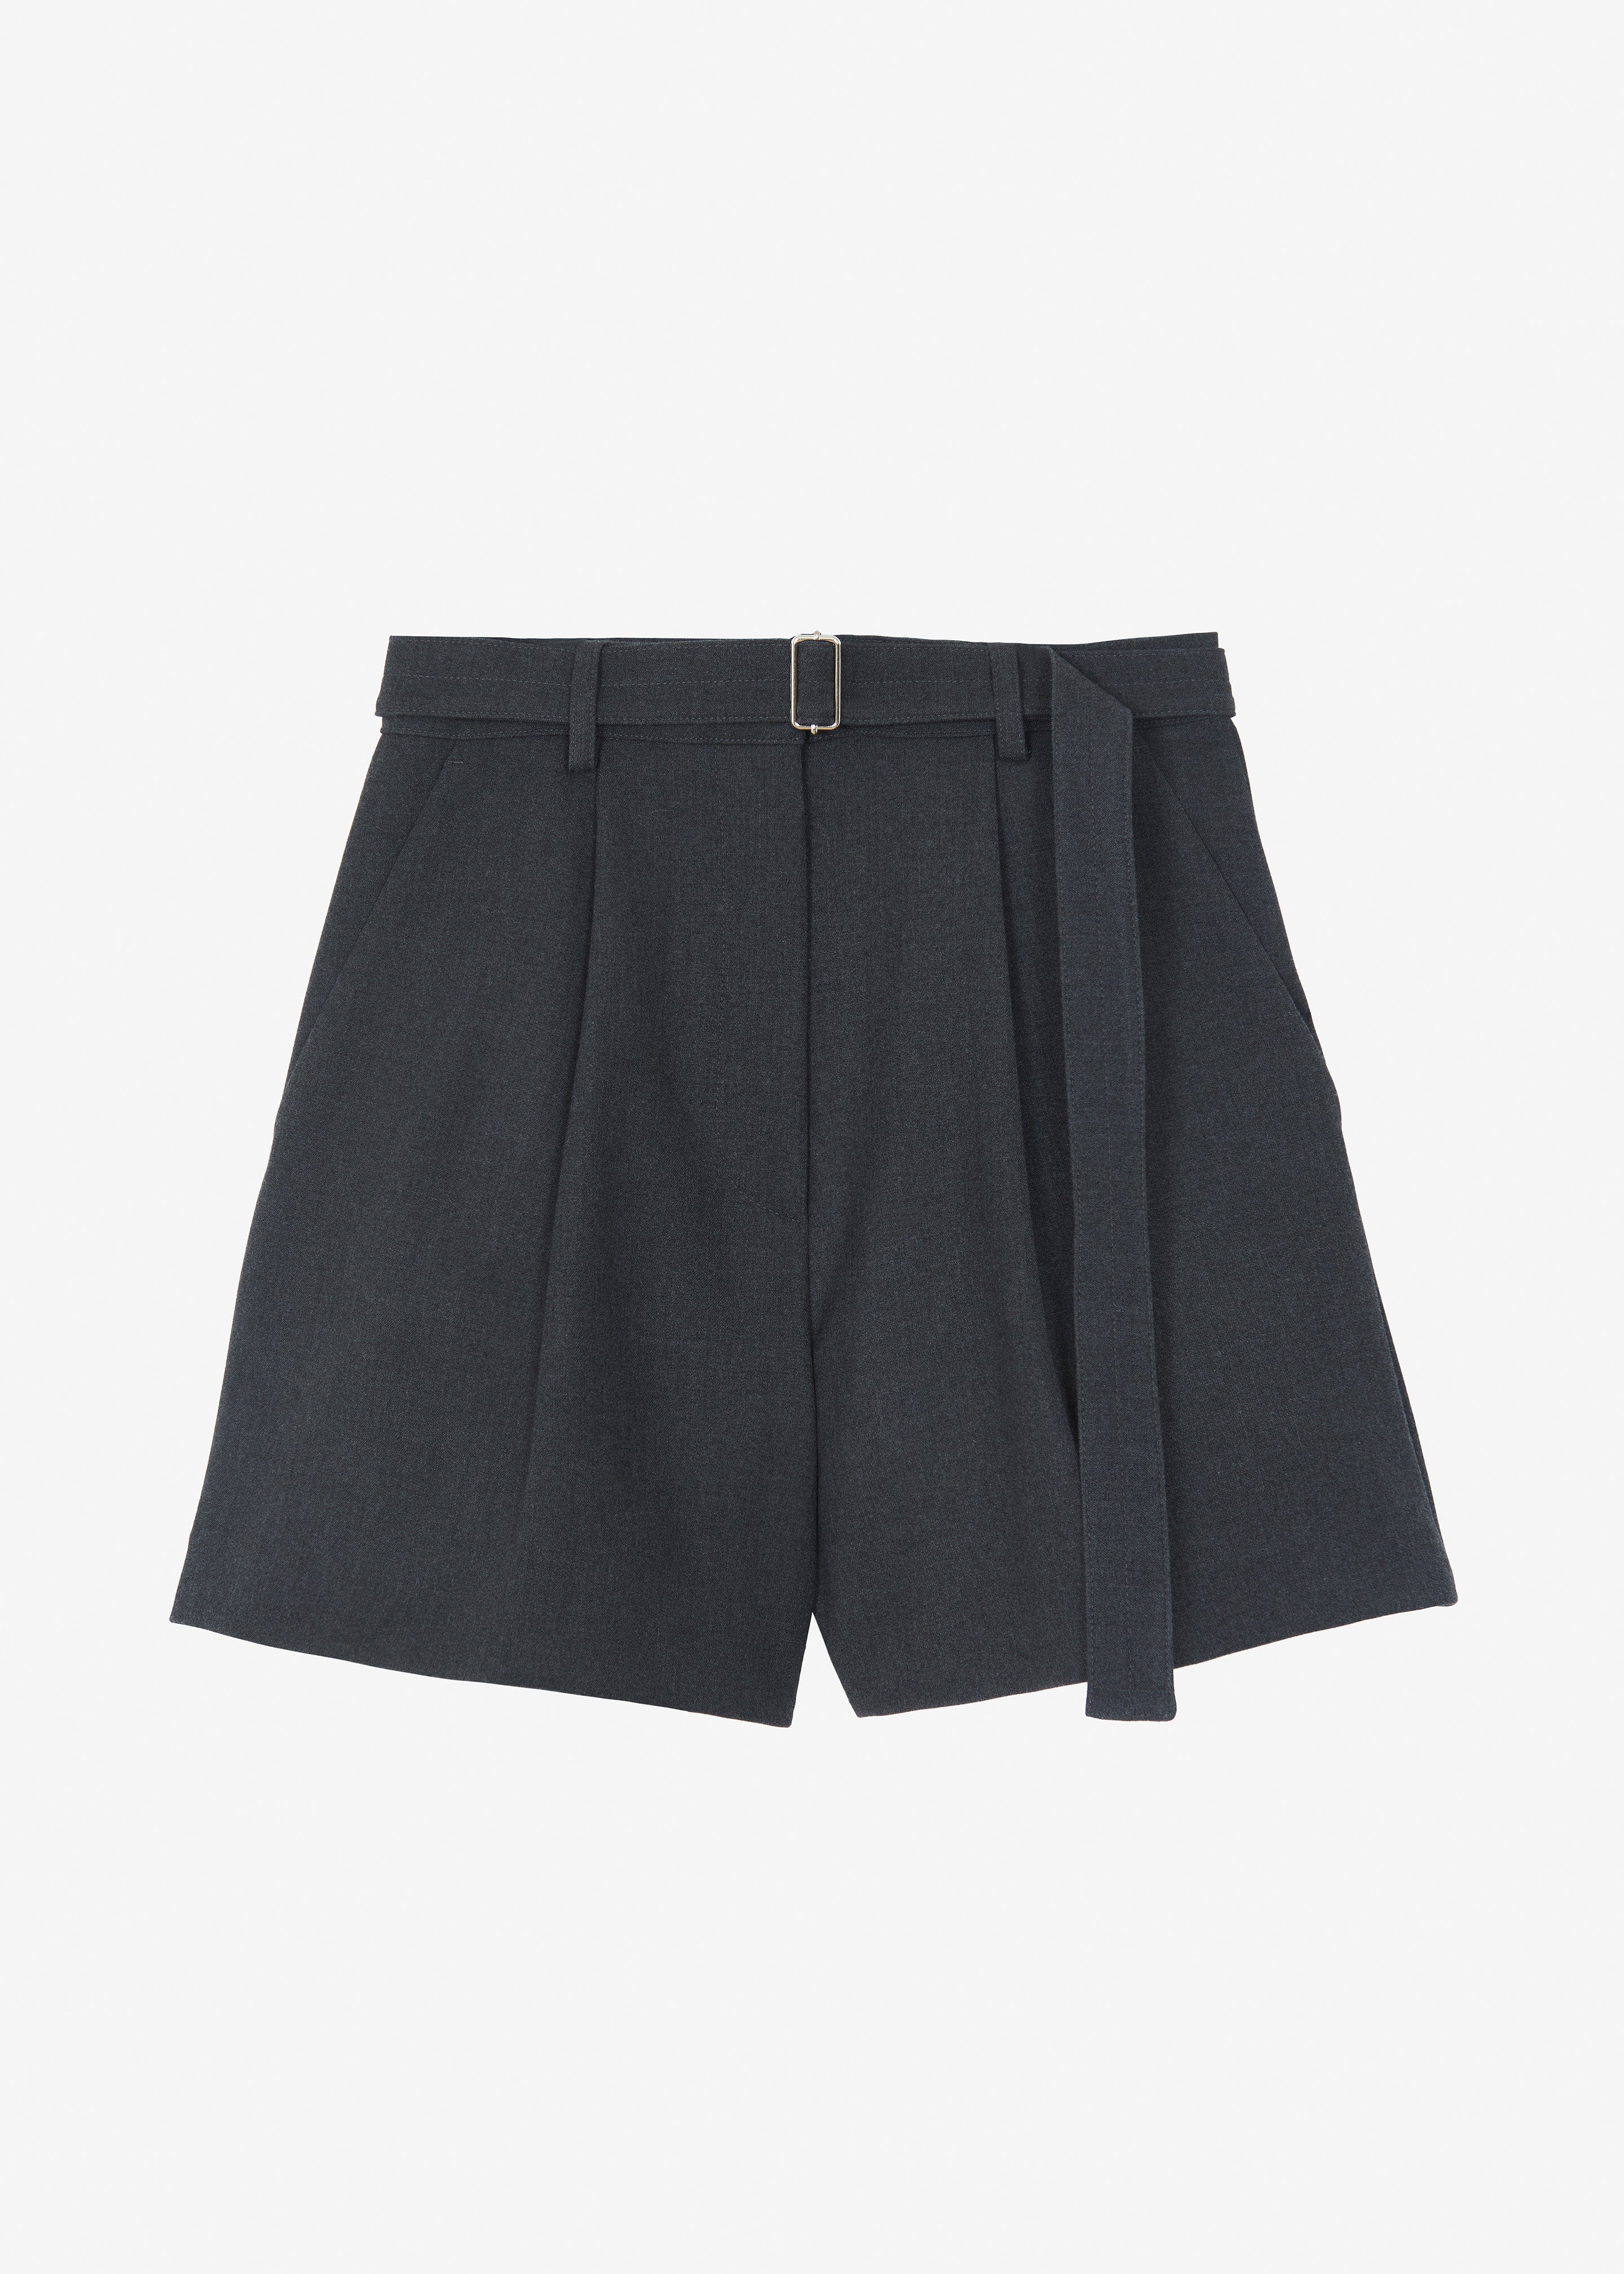 Avalon Belted Shorts - Charcoal - 9